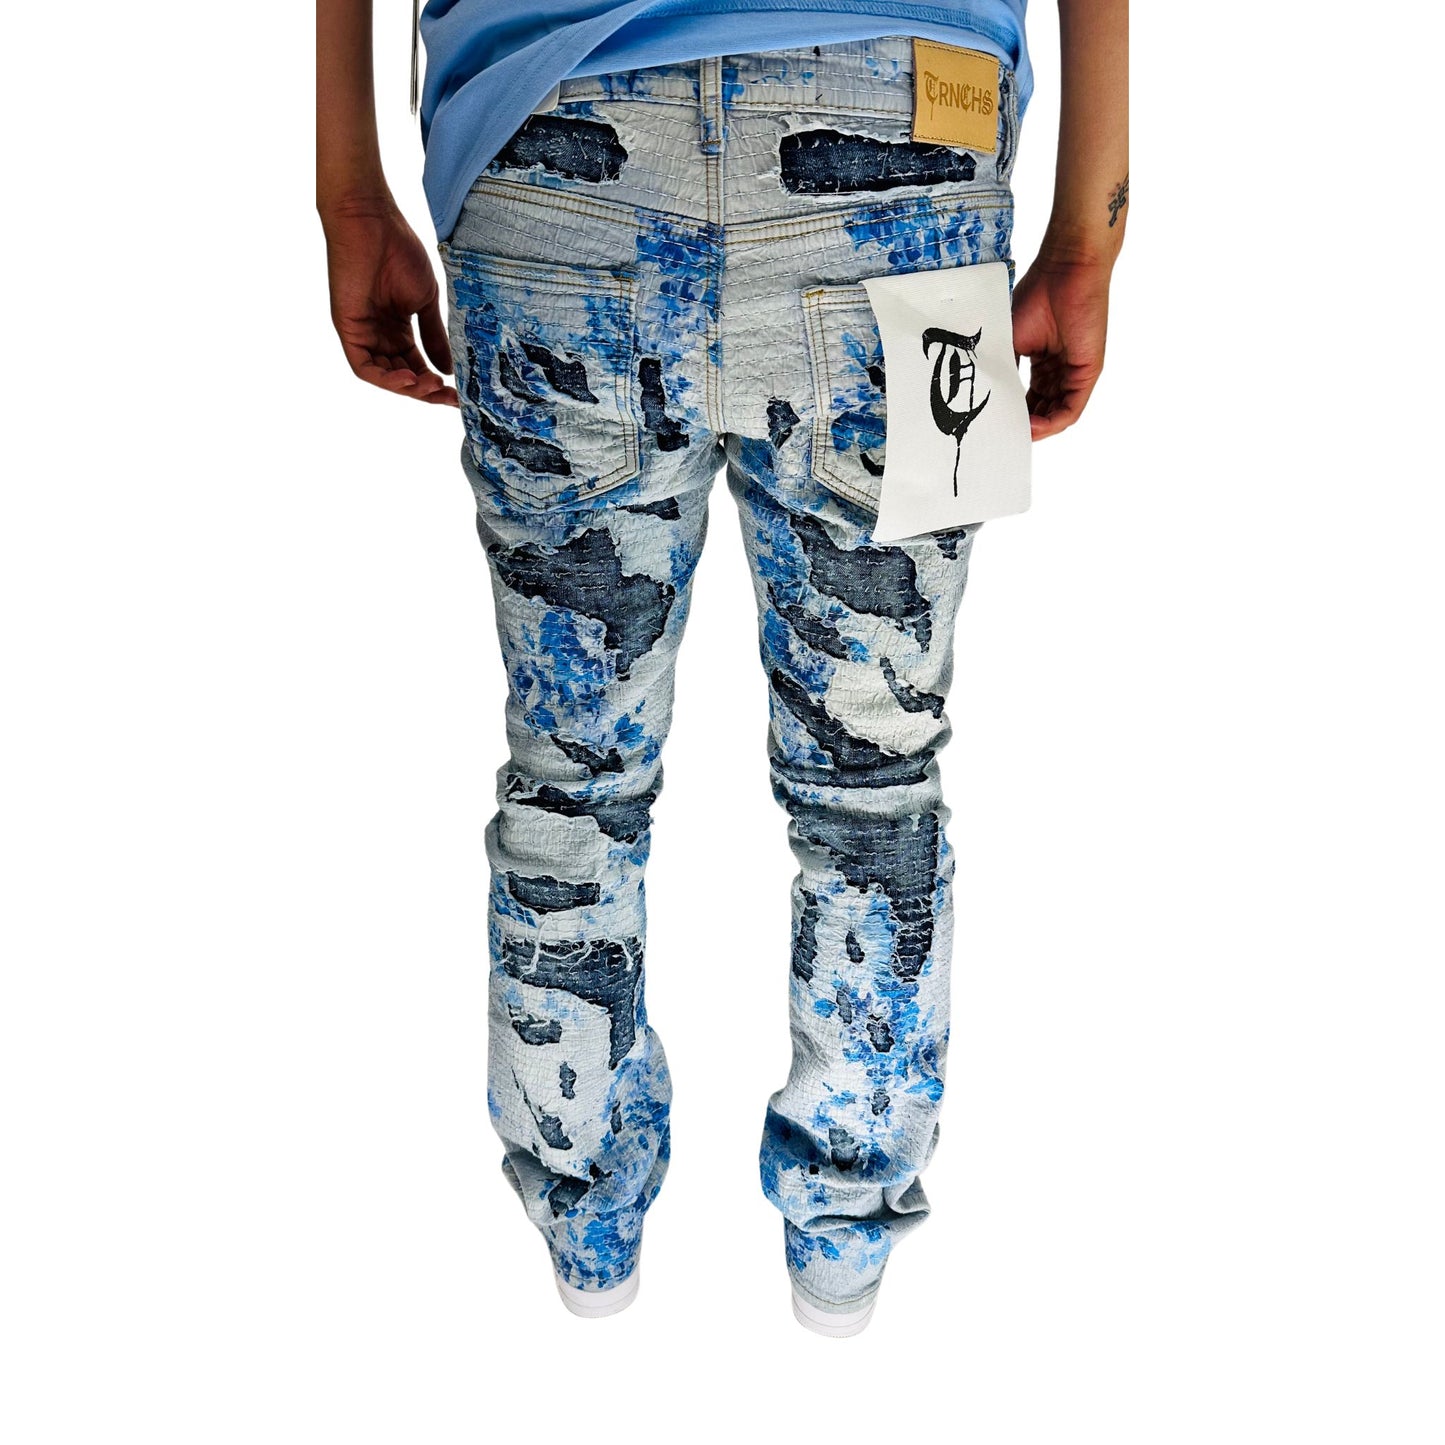 TRNCHS Blue FLORIDIANS Stacked Jeans